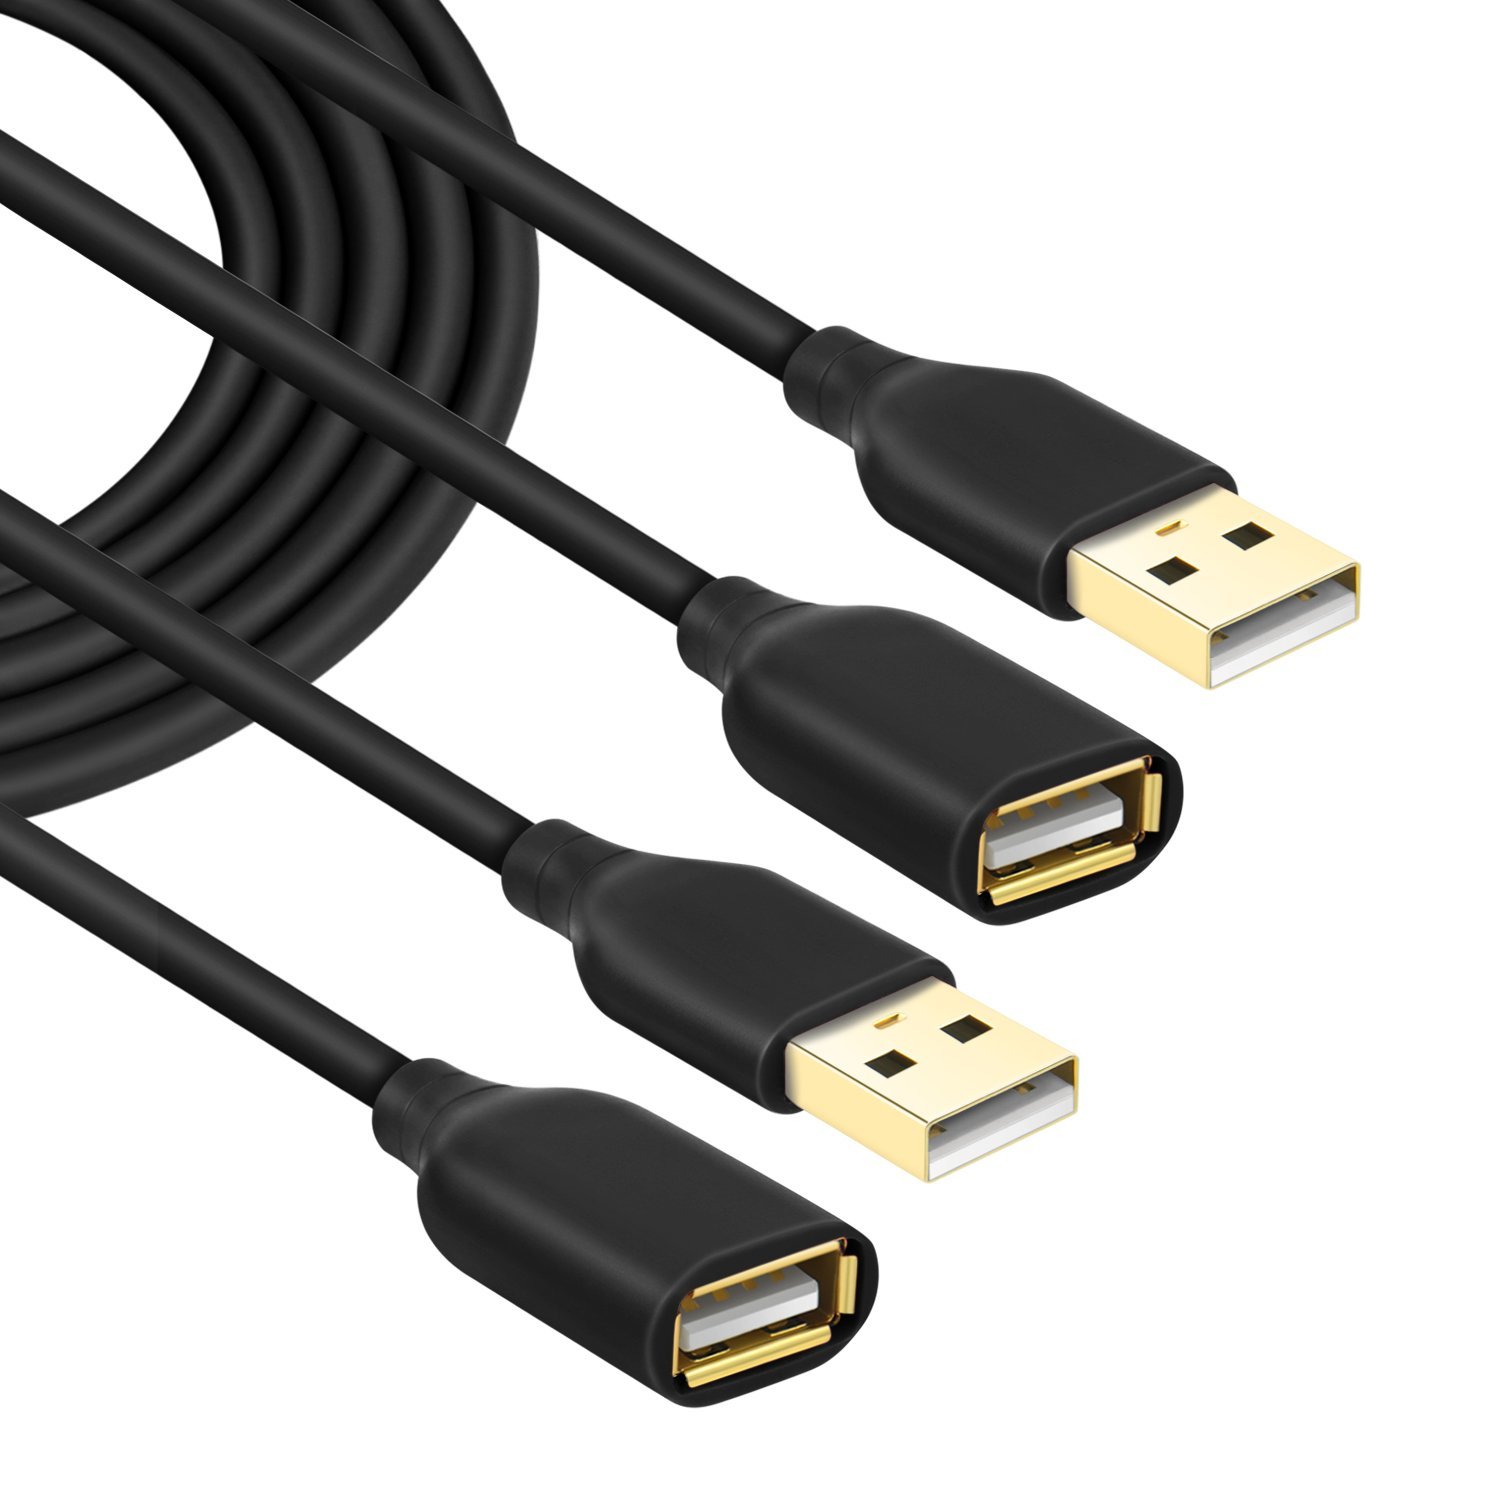 Primary image for Costyle USB Extension Cable 10FT, 2-Pack USB 2.0 Type A Male to A Female Extensi